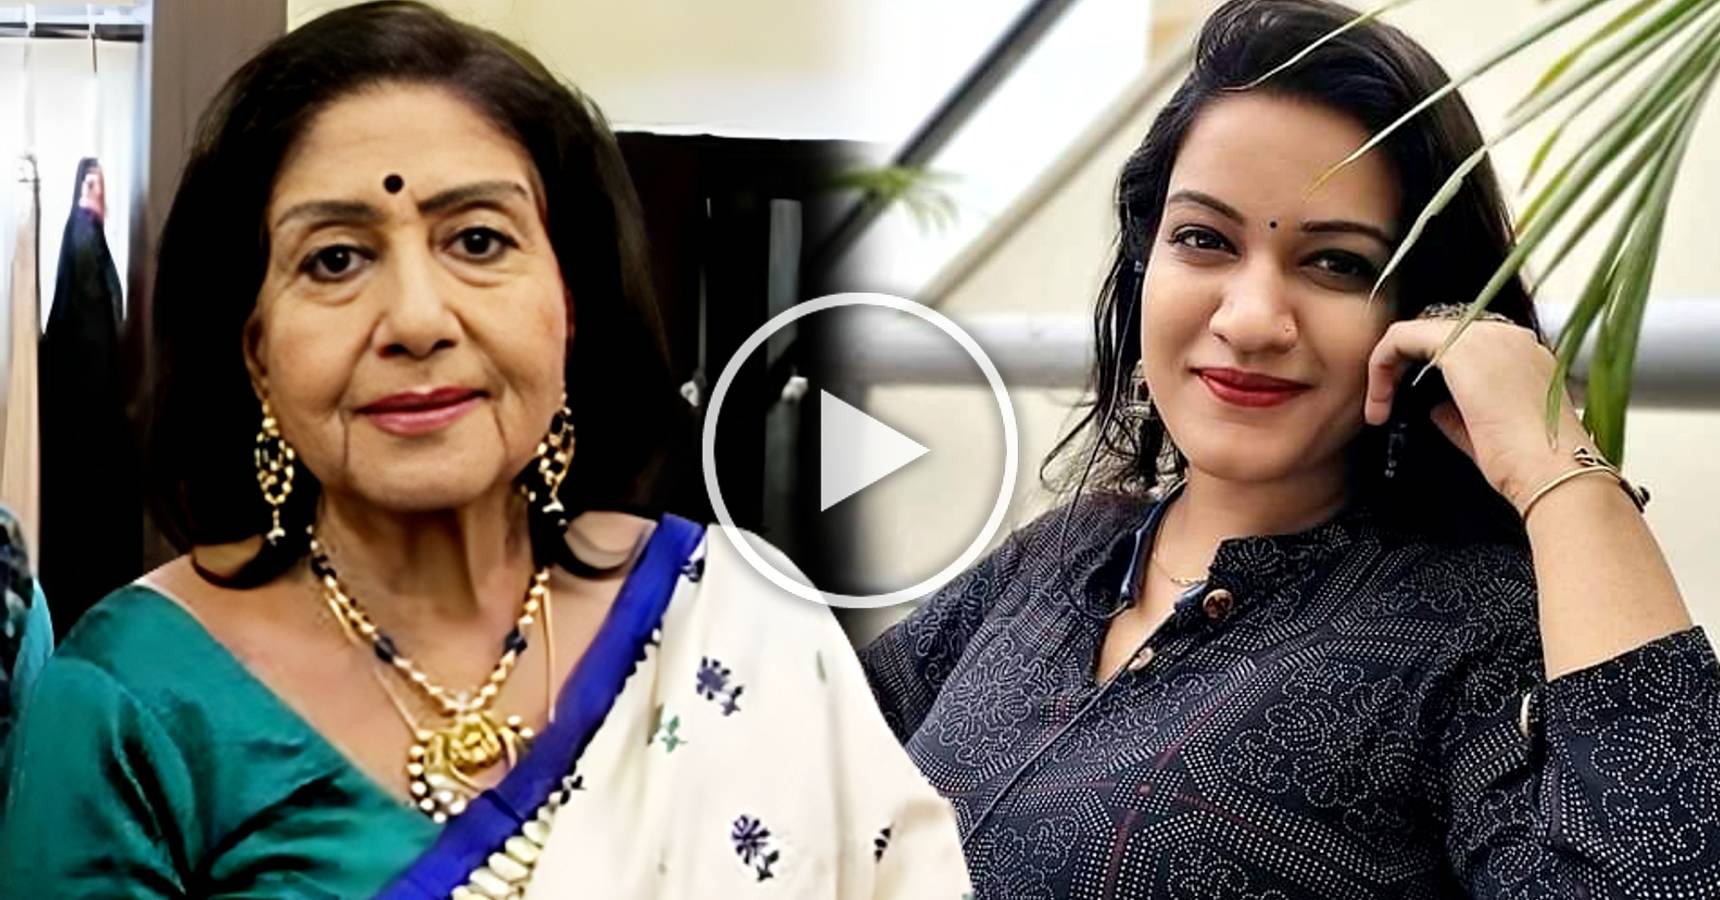 Viral Nandini Didi shares screen with Sabitri Chatterjee in her new movie Teen Sotti